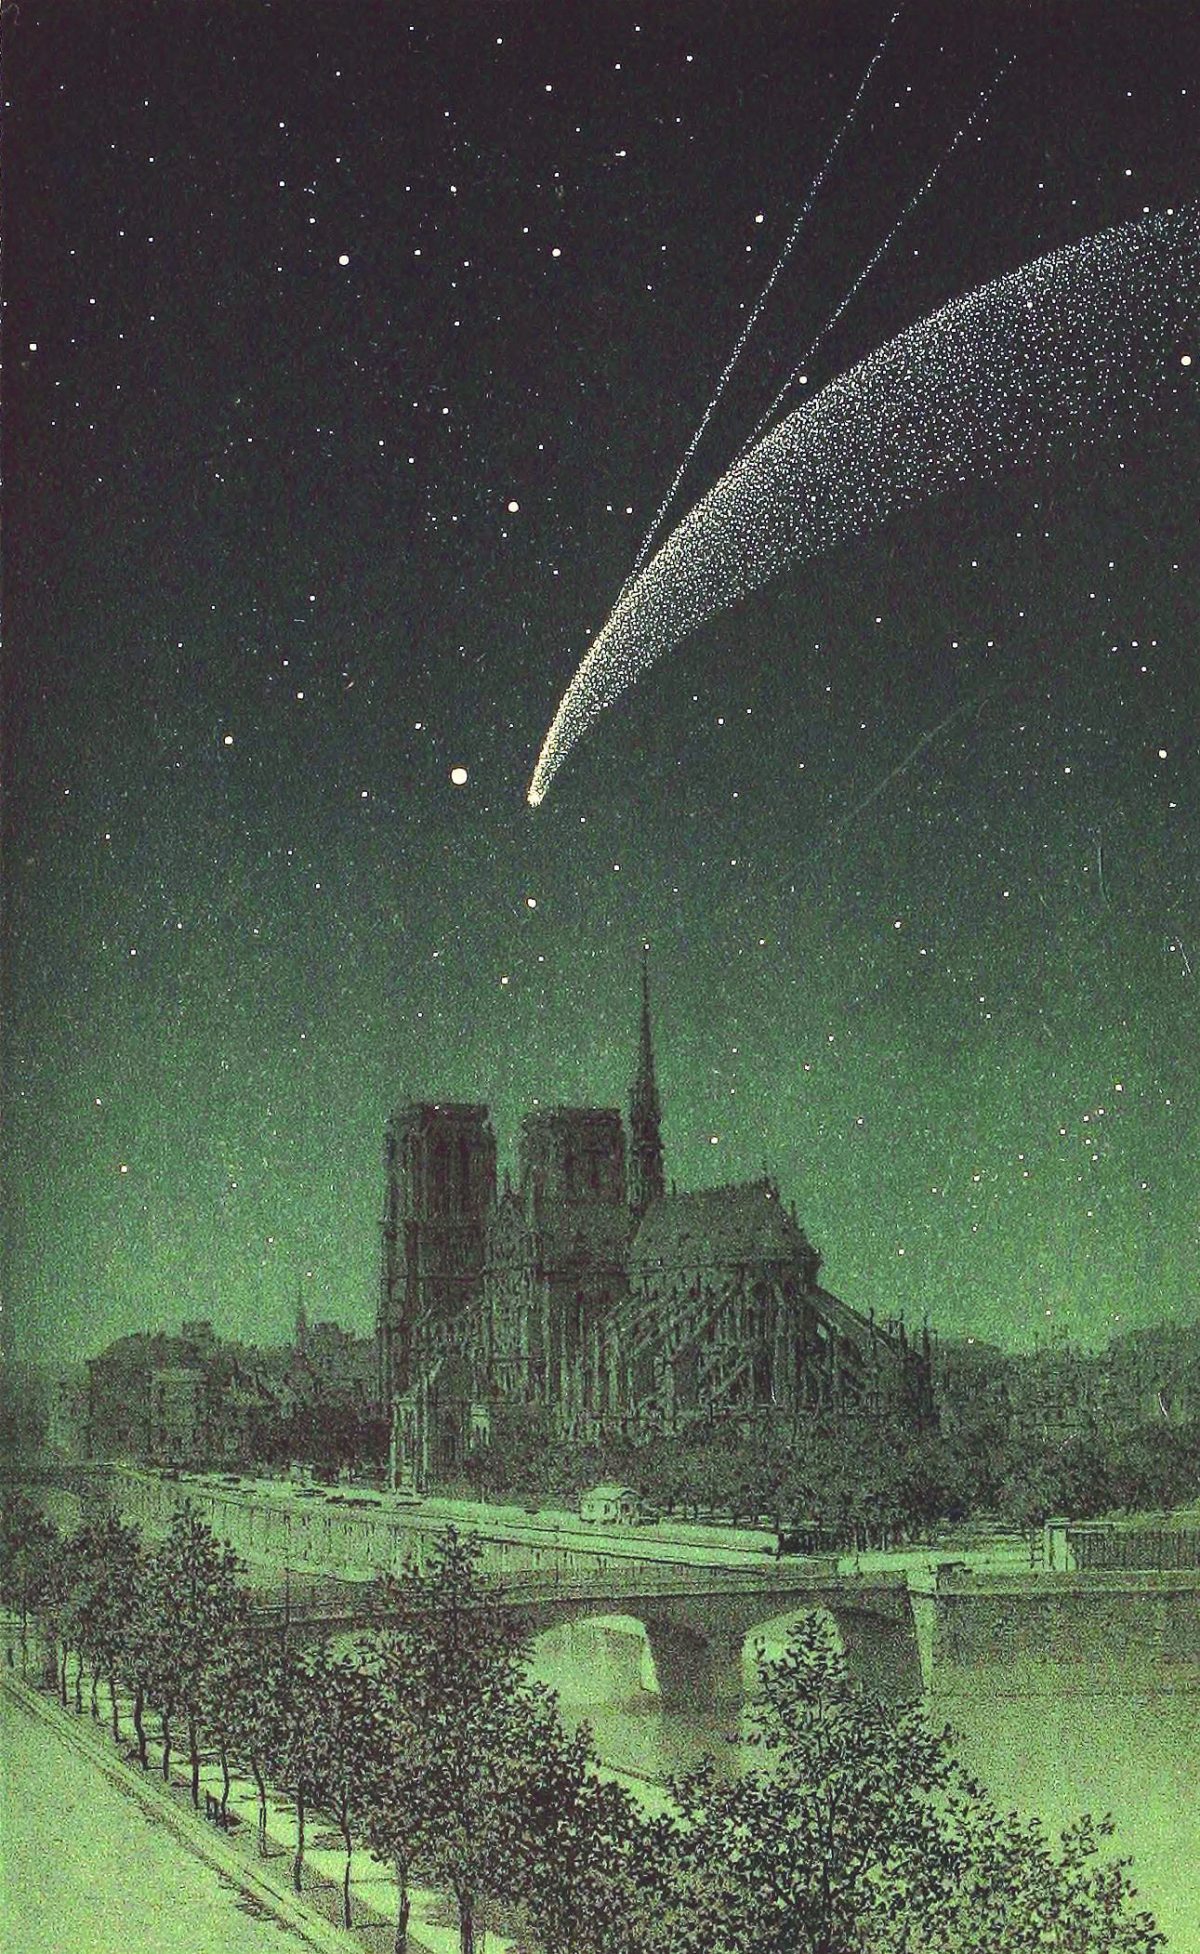 Comet-Donati-above-Notre-Dame.-Drawing-published-in-The-sky-of-Amédée-Guillemin-fifth-edition-1877-Hachette.jpg